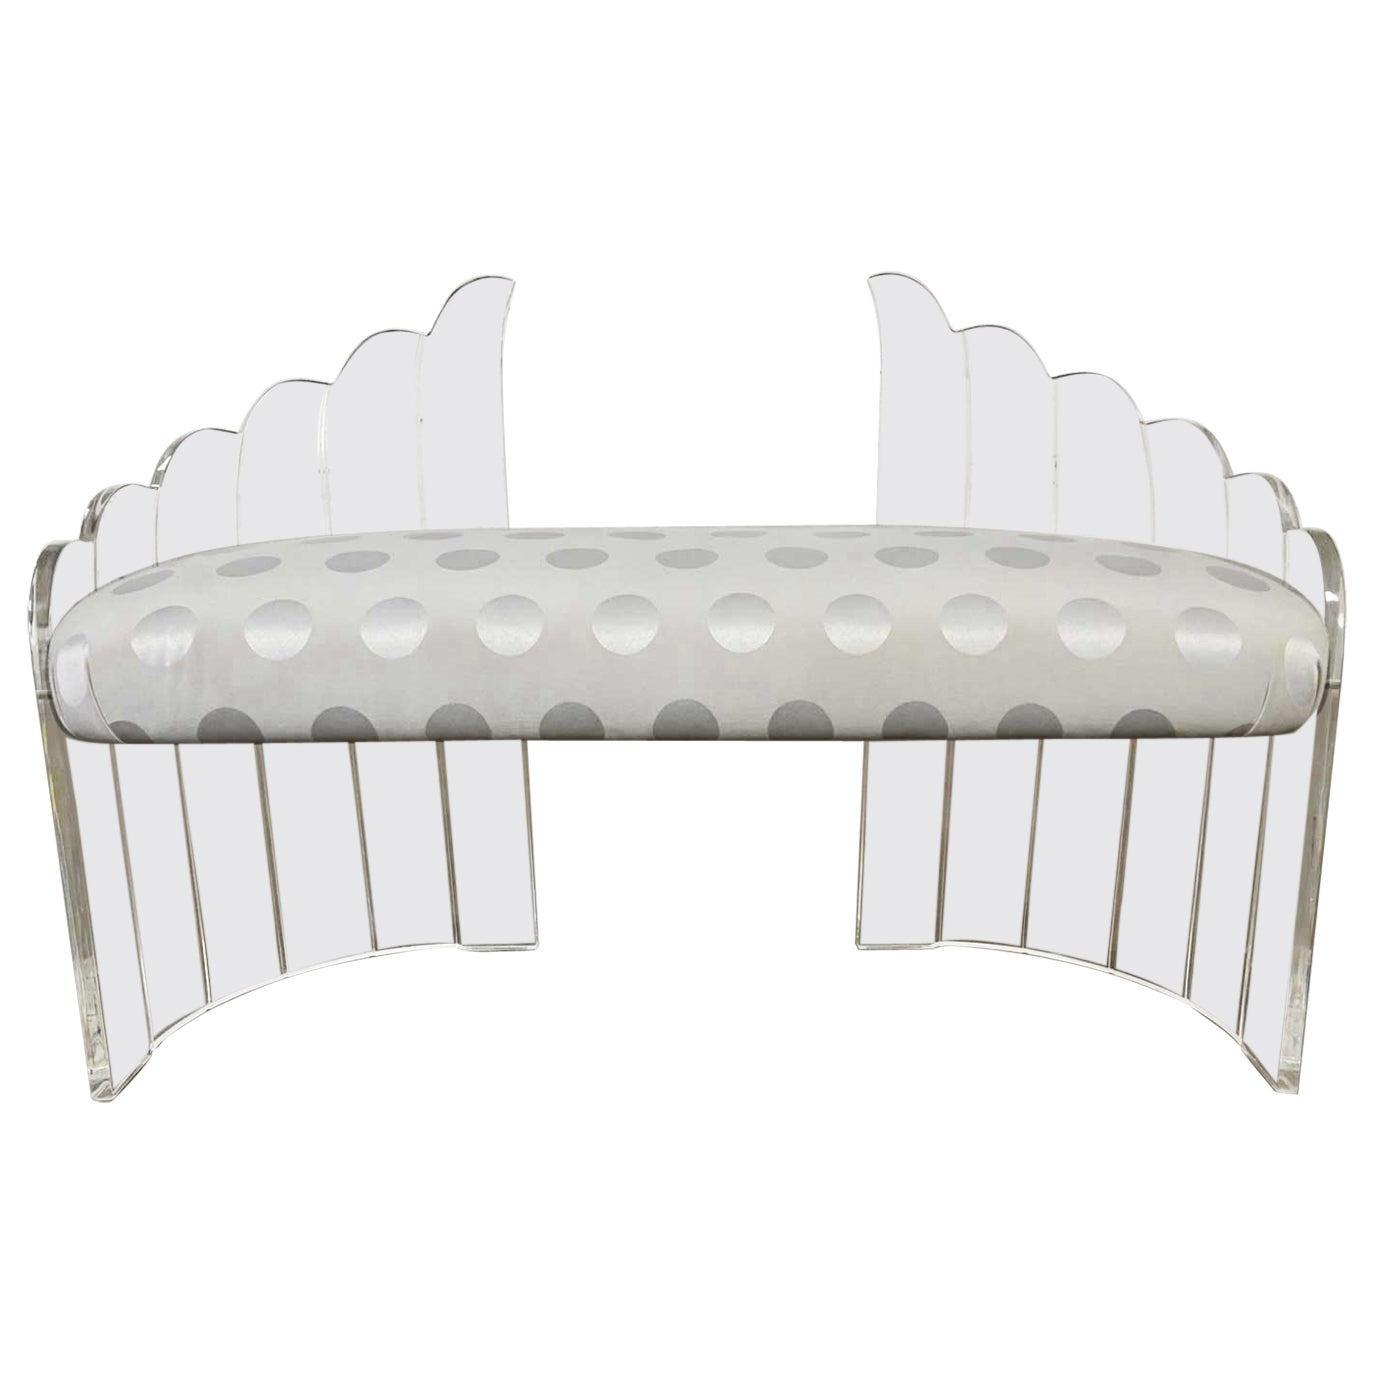 Late 20th Century Lucite Art Deco Hollywood Regency Sculptural Wing Bench For Sale